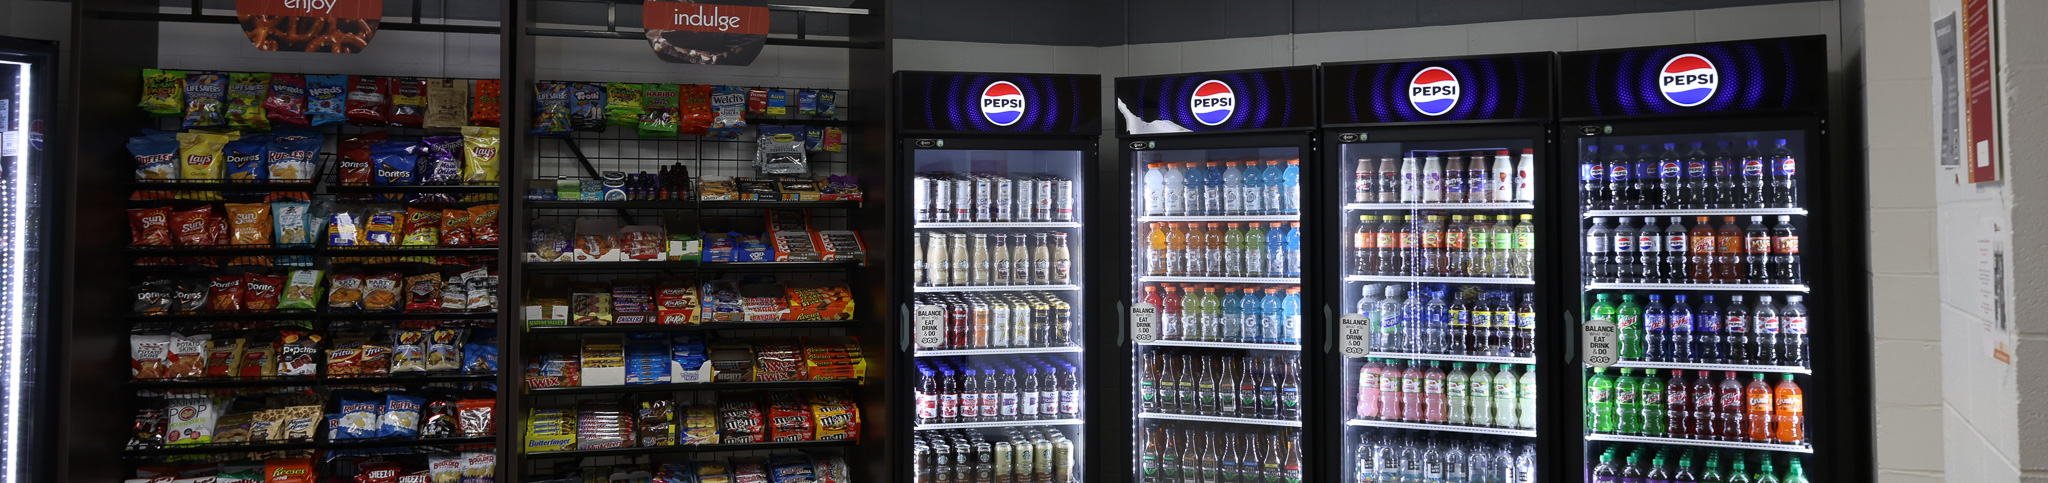 pepsi coolers and snack counter